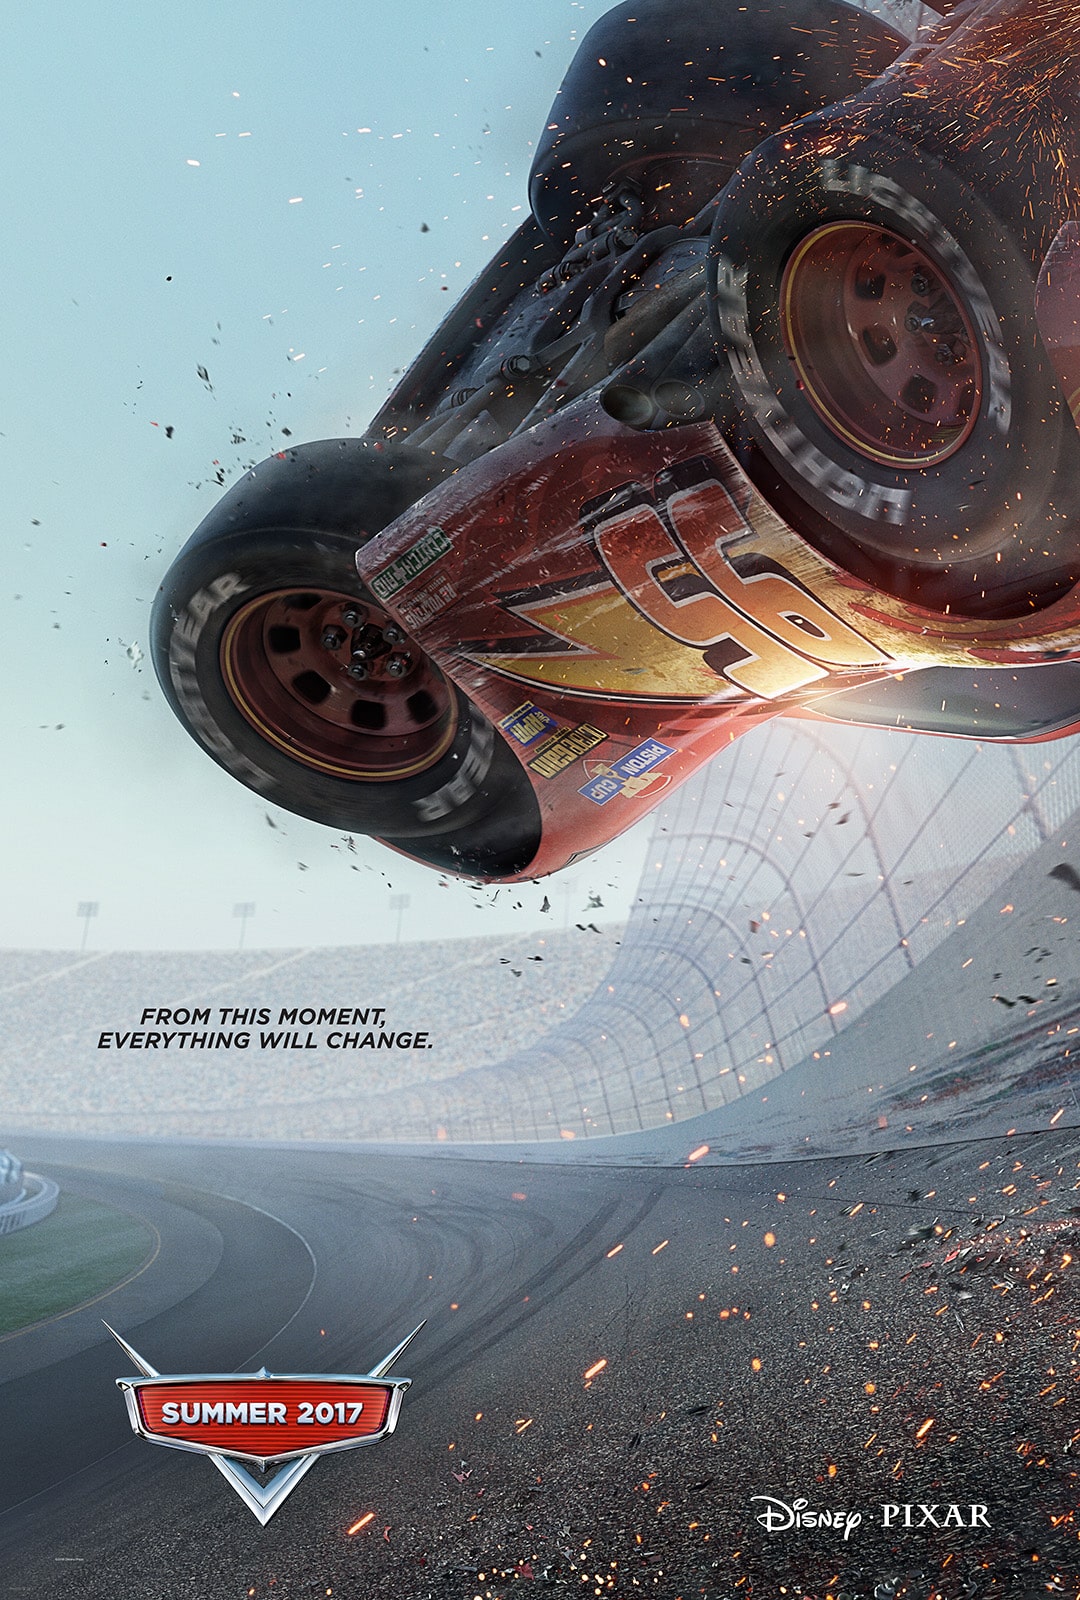 Cars 3: About the Characters #Cars3 | ThisNThatwithOlivia.com